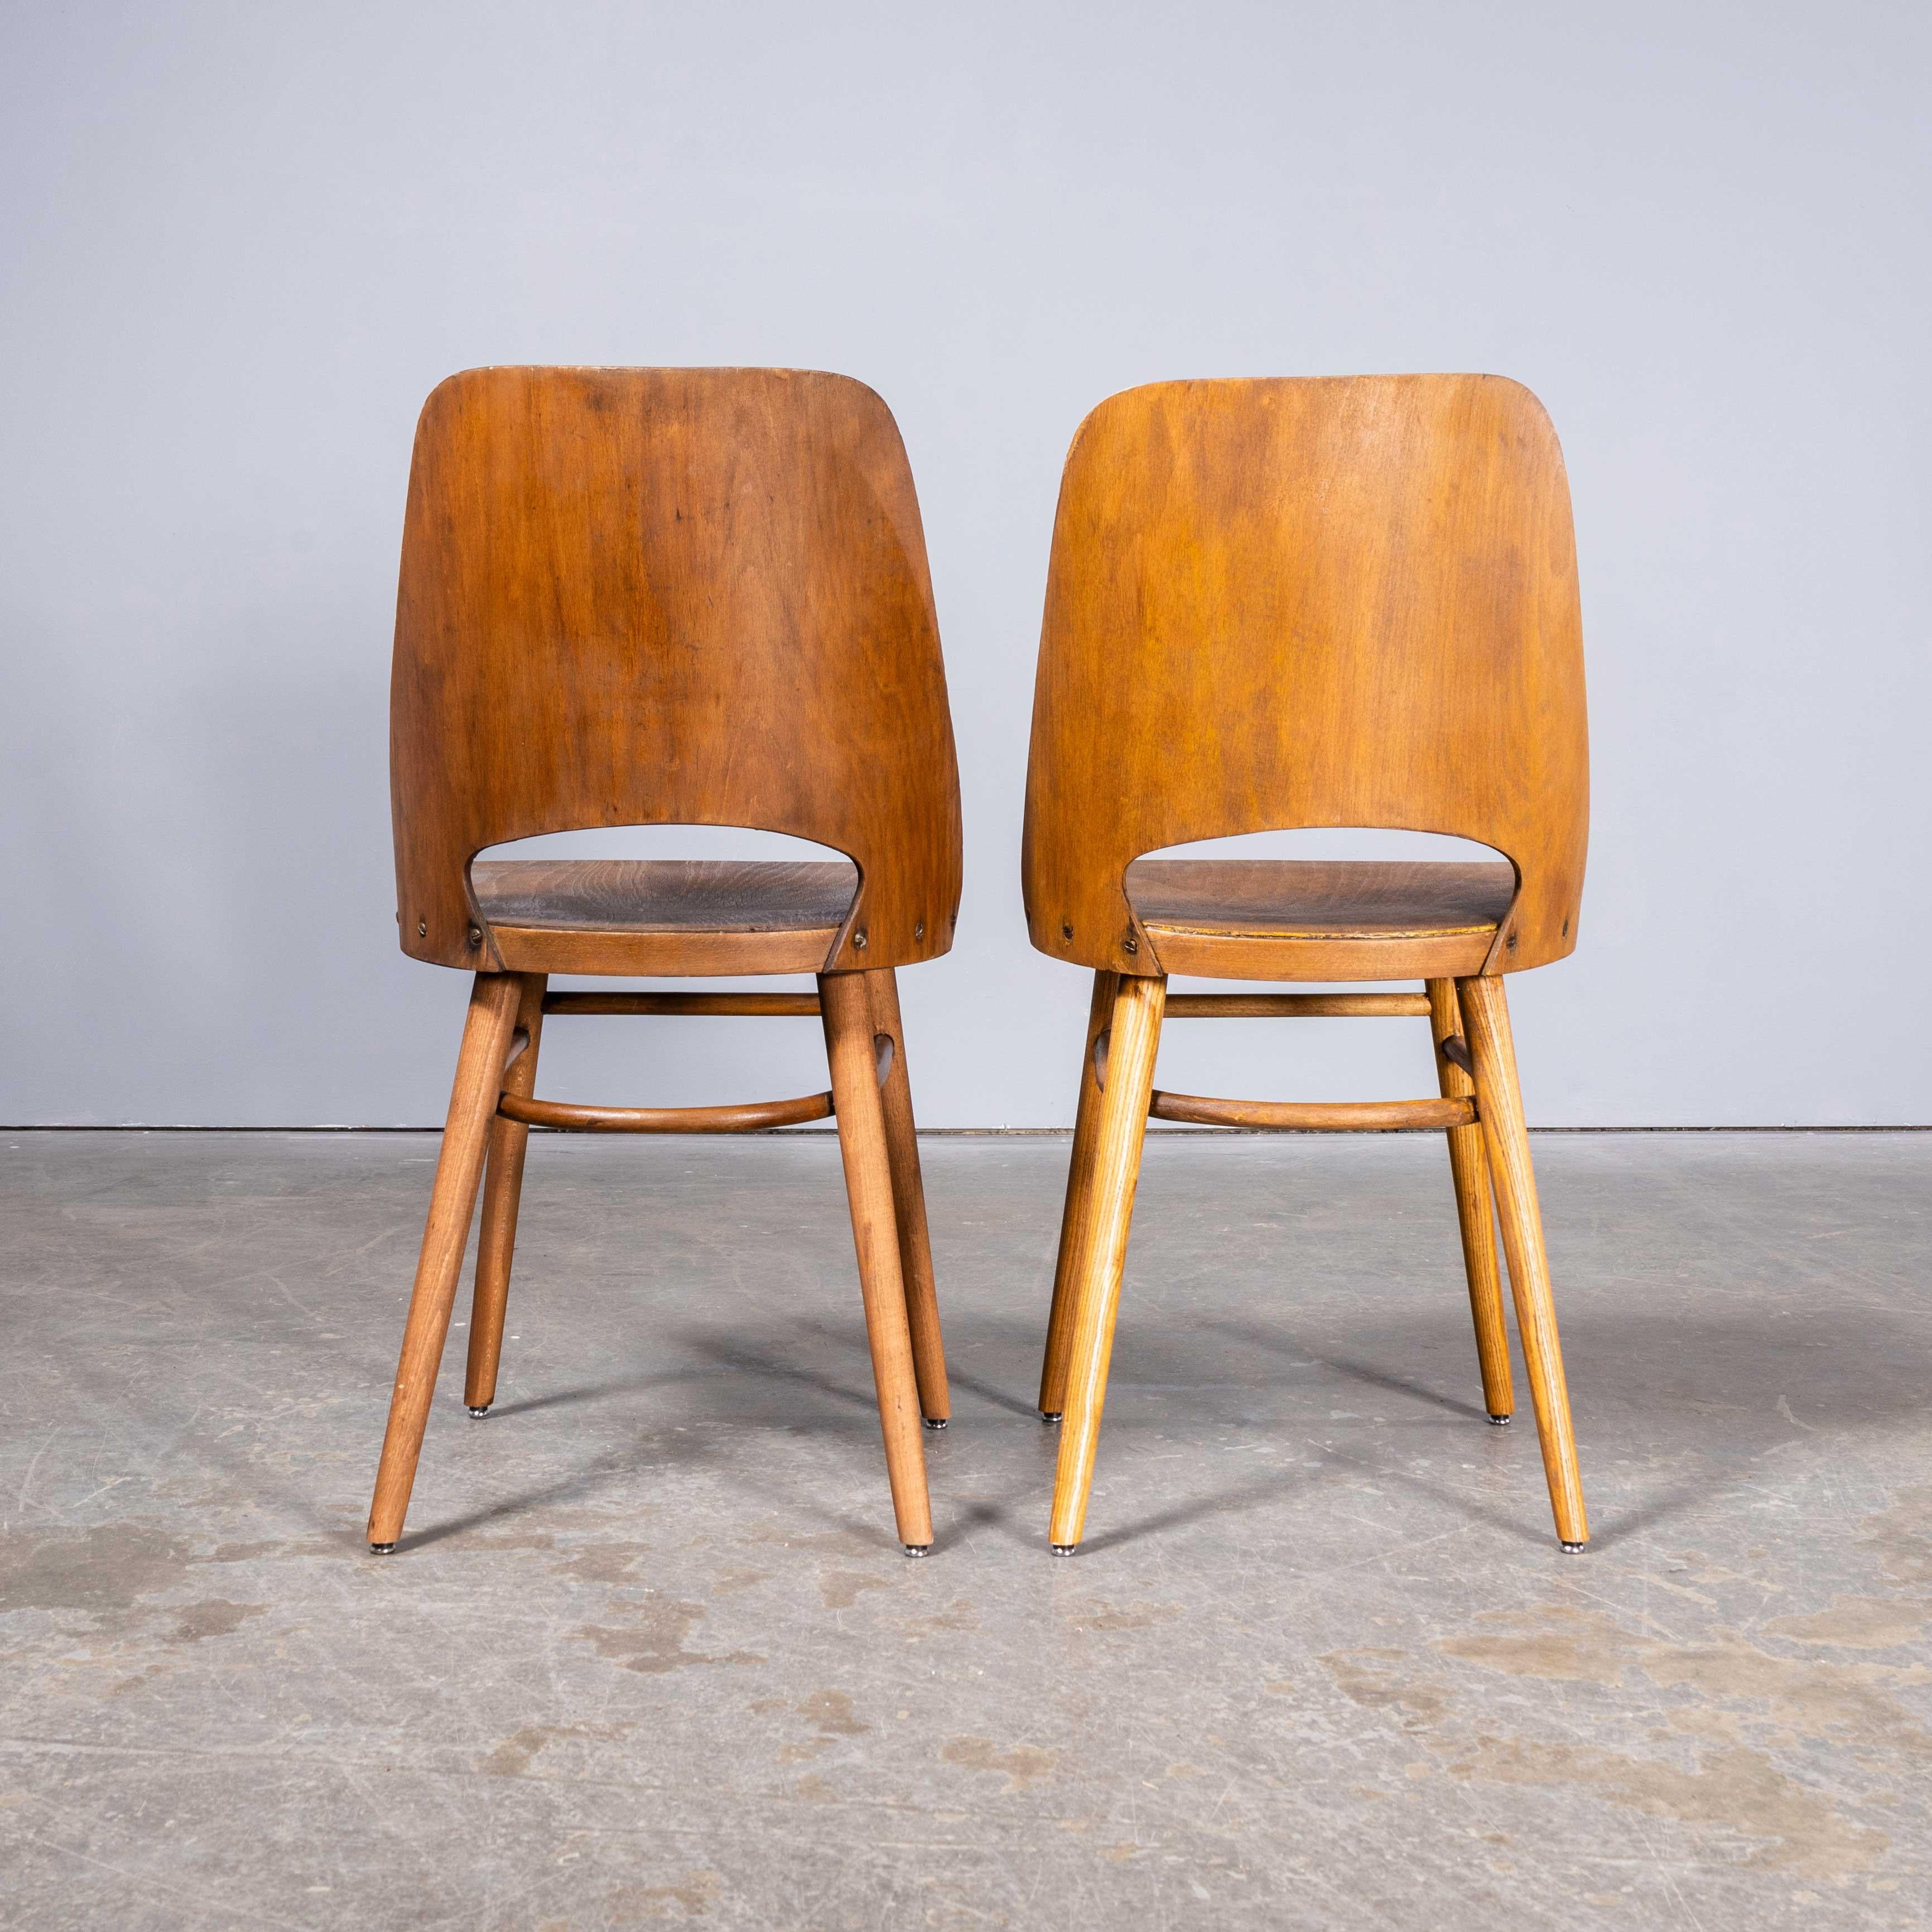 1950’s Mid Oak Dining Chairs By Radomir Hoffman For Ton – Pair In Good Condition For Sale In Hook, Hampshire